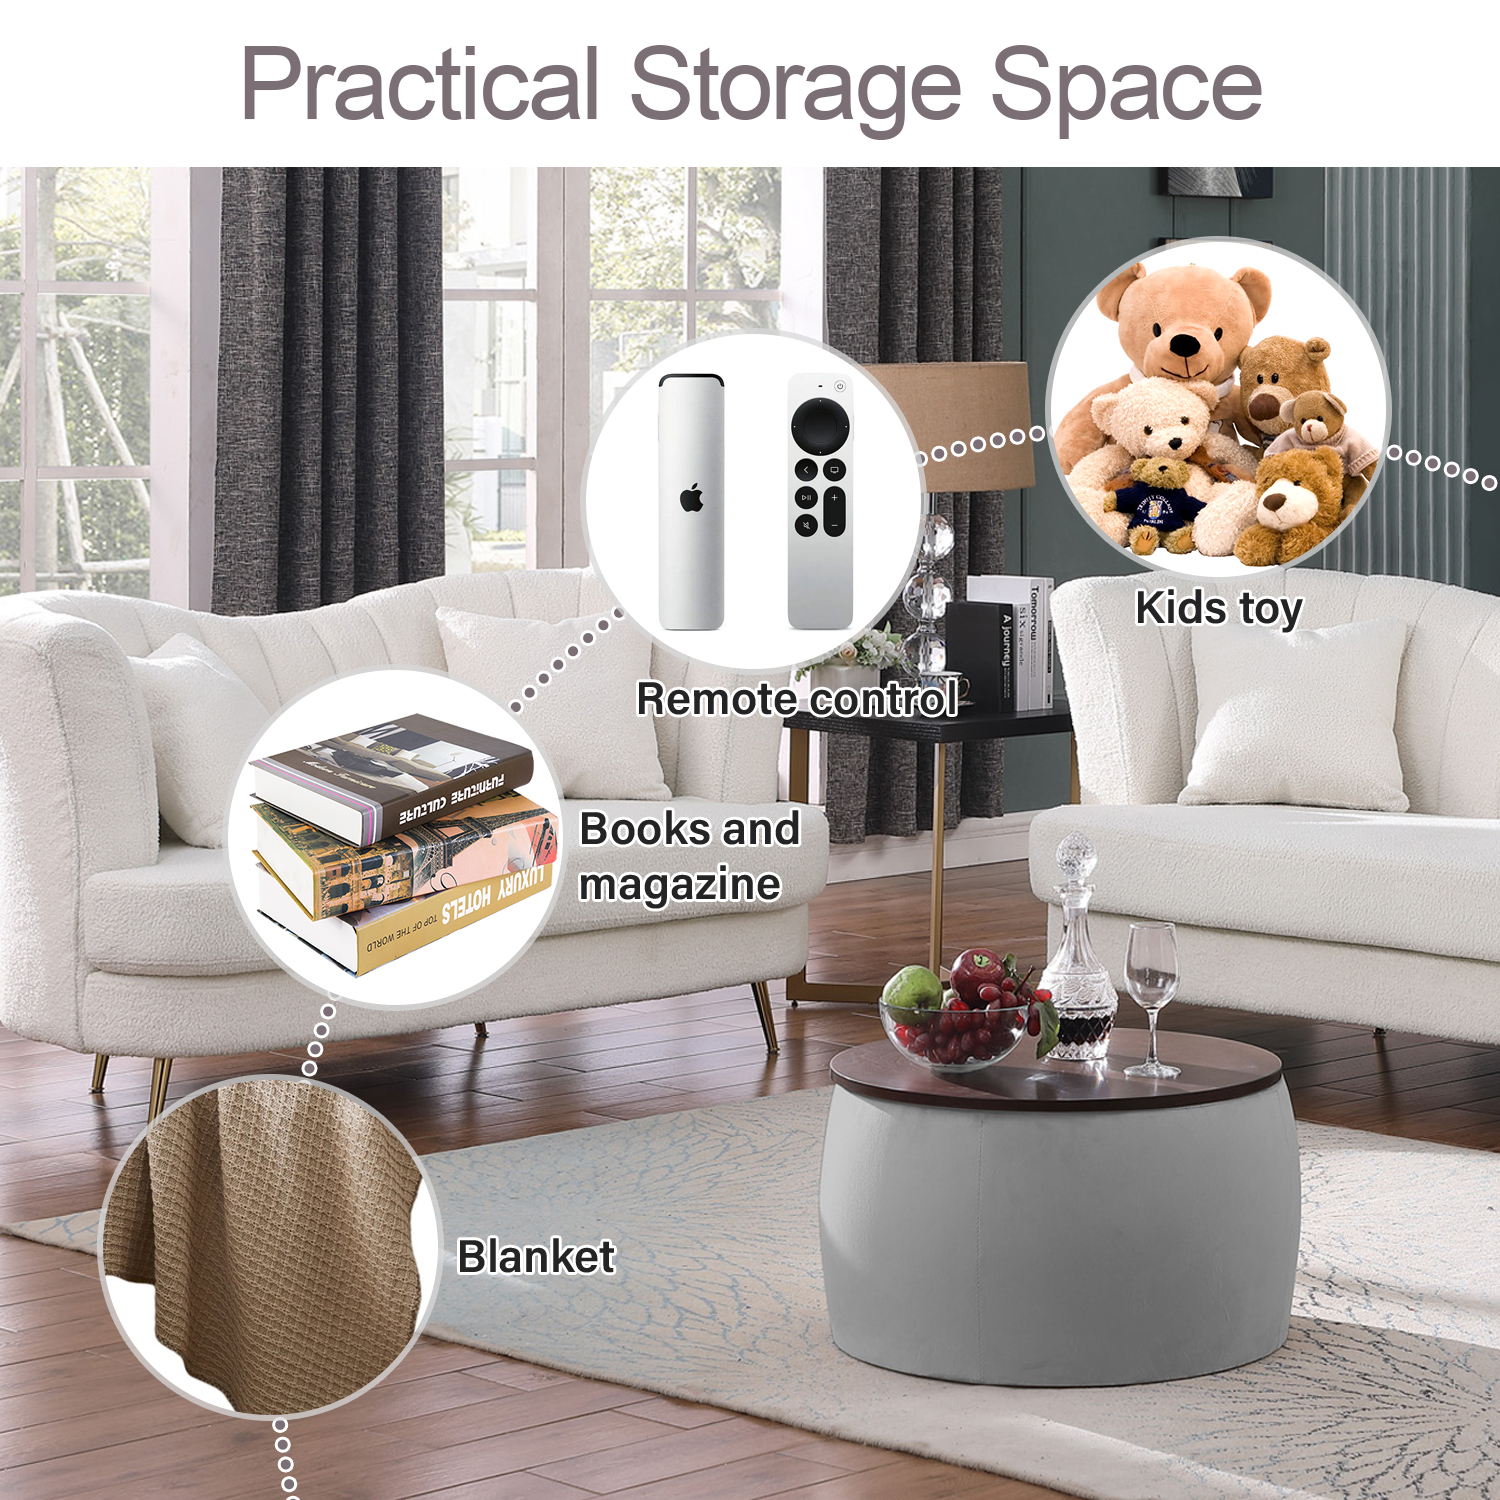 Storage Ottoman with Tray, Round Ottoman Coffee Table Handmade with Storage, Cube Organizer, End Table for Living Room, LJ423 - image 5 of 6